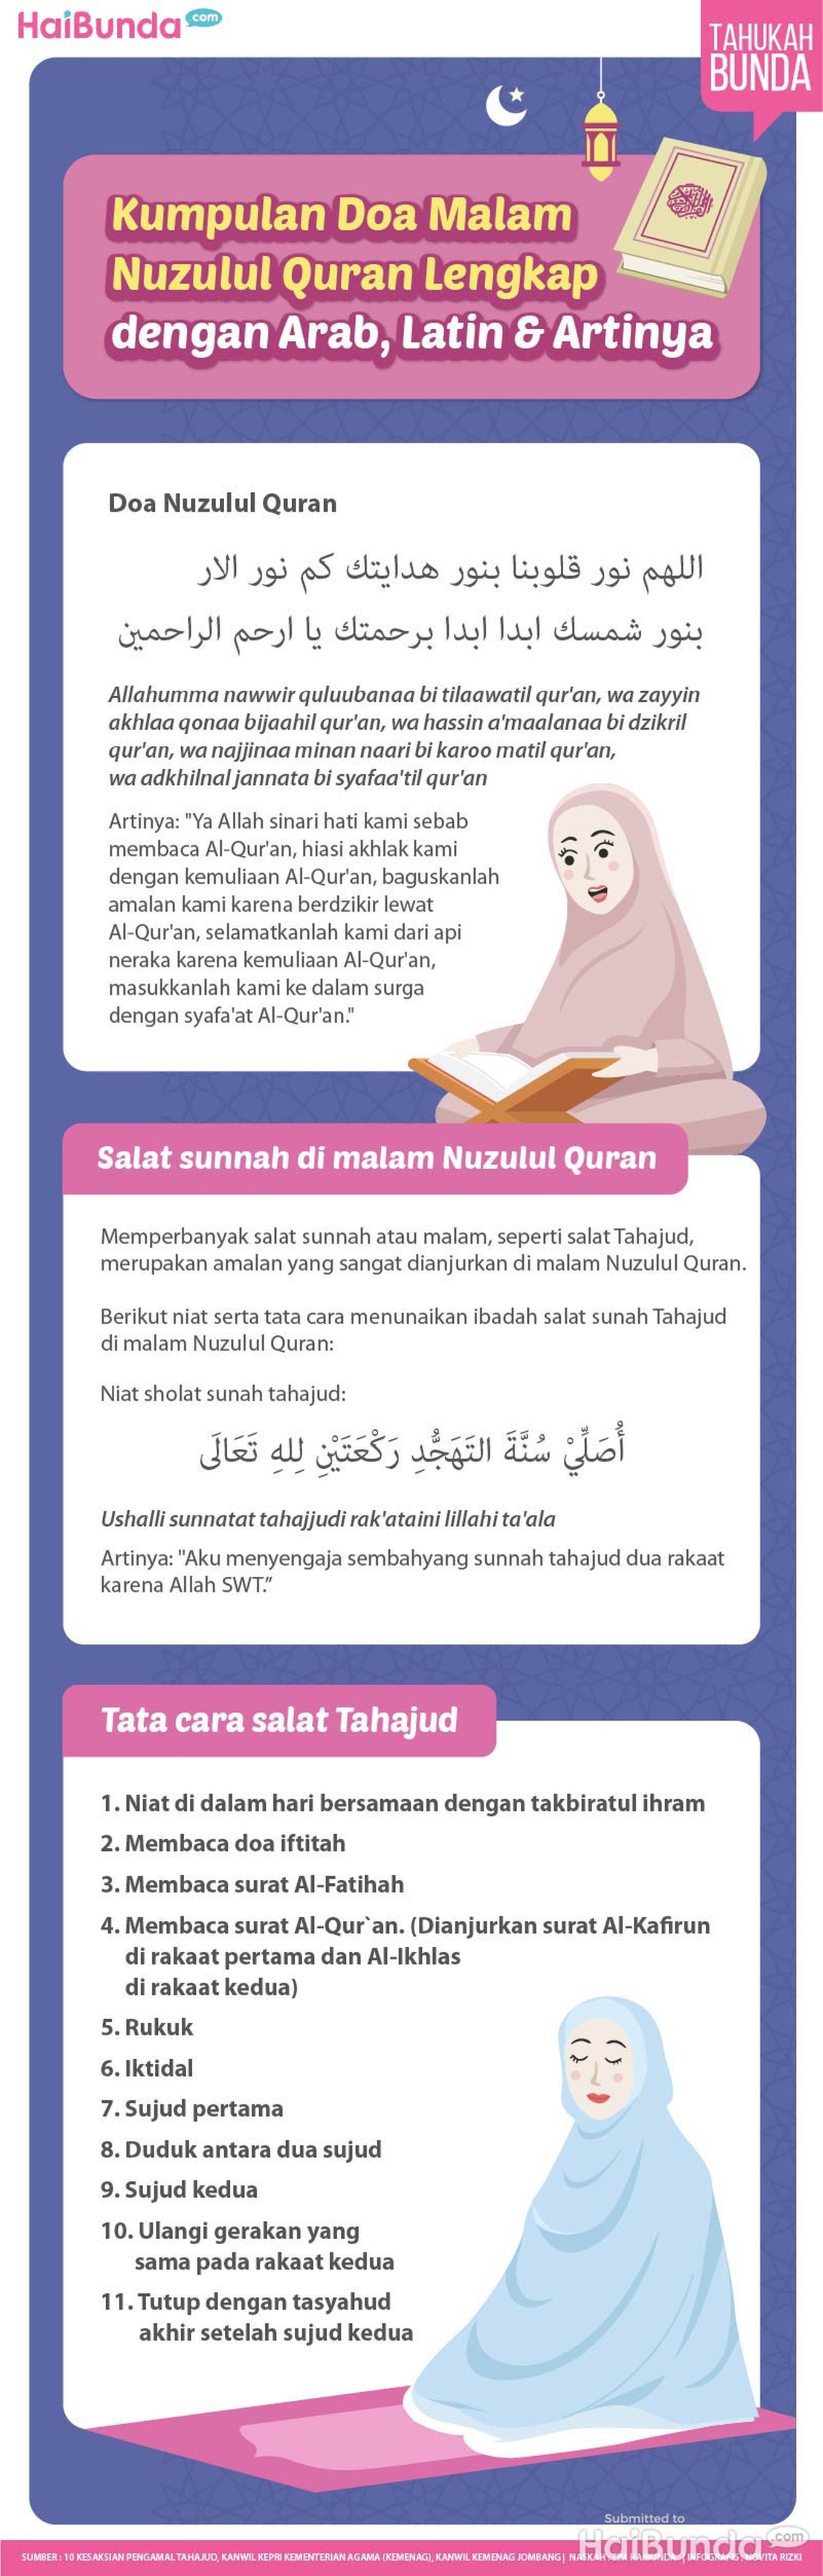 Infographic Collection of Nuzulul Quran Evening Prayers Complete with Arabic, Latin & Meaning